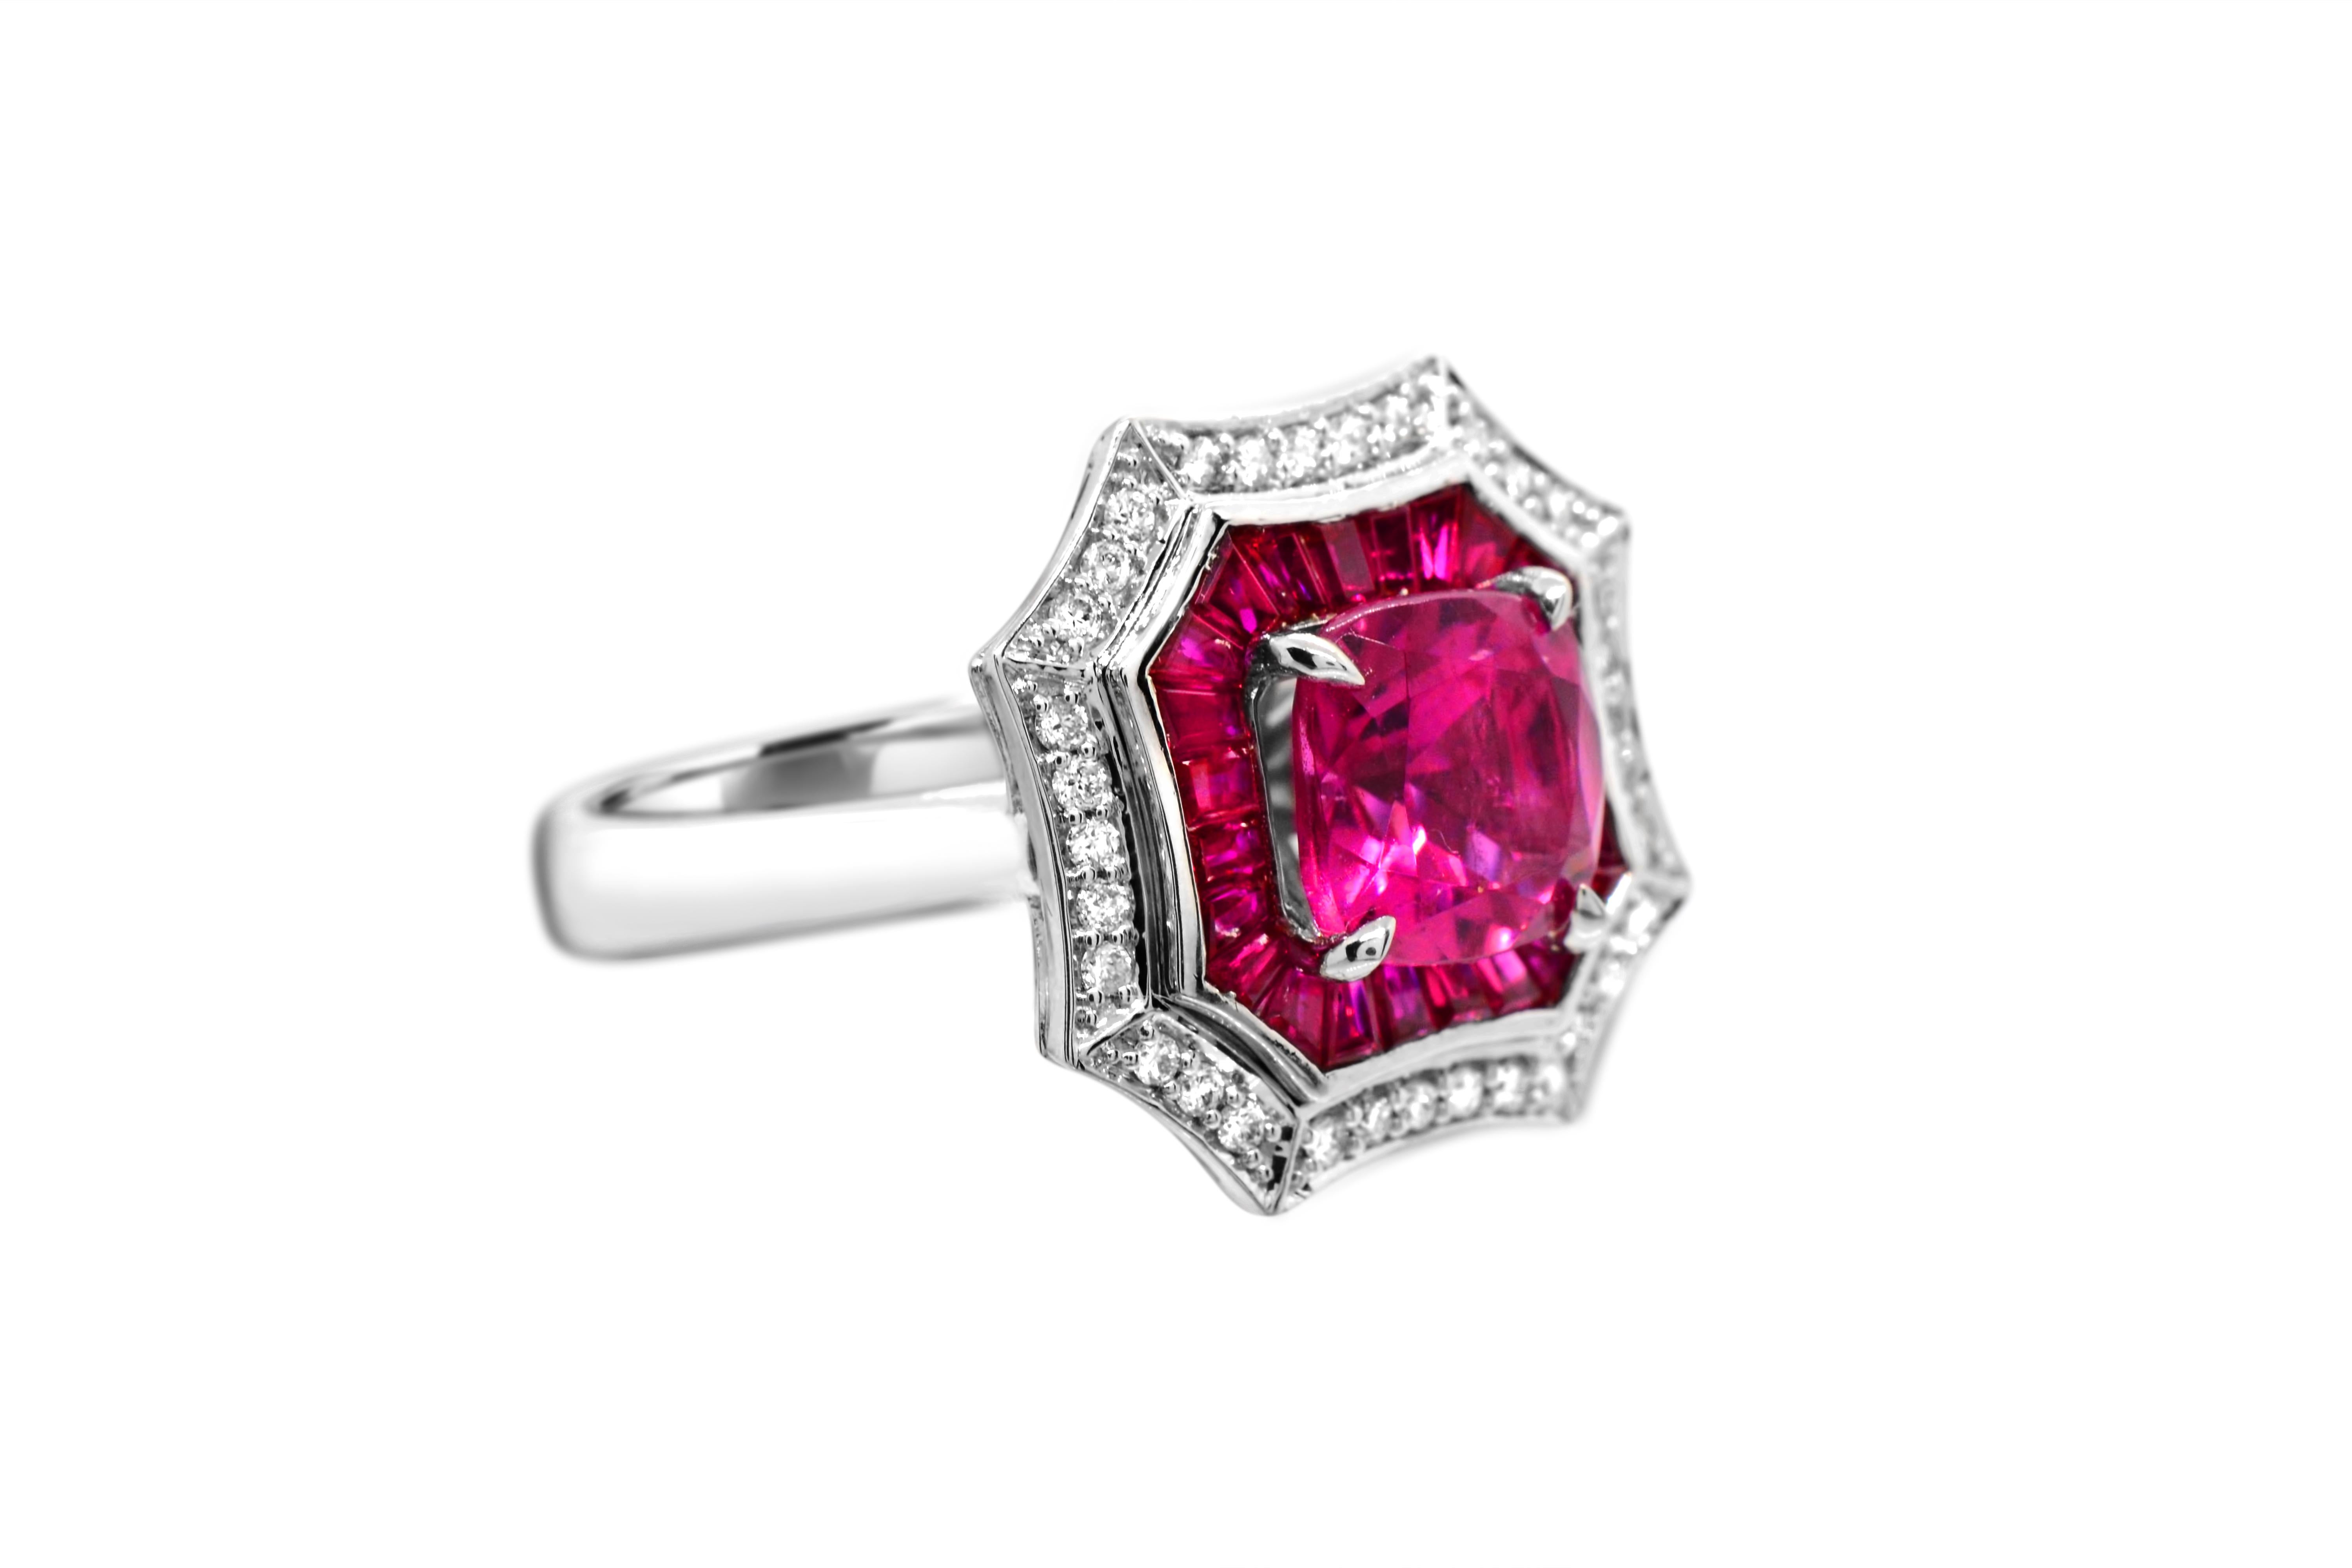 You will love this bright pink and fiery red combination! A gorgeous octagonal cocktail ring with diamond accents set in a 14kt white gold mounting. 
This is a real 